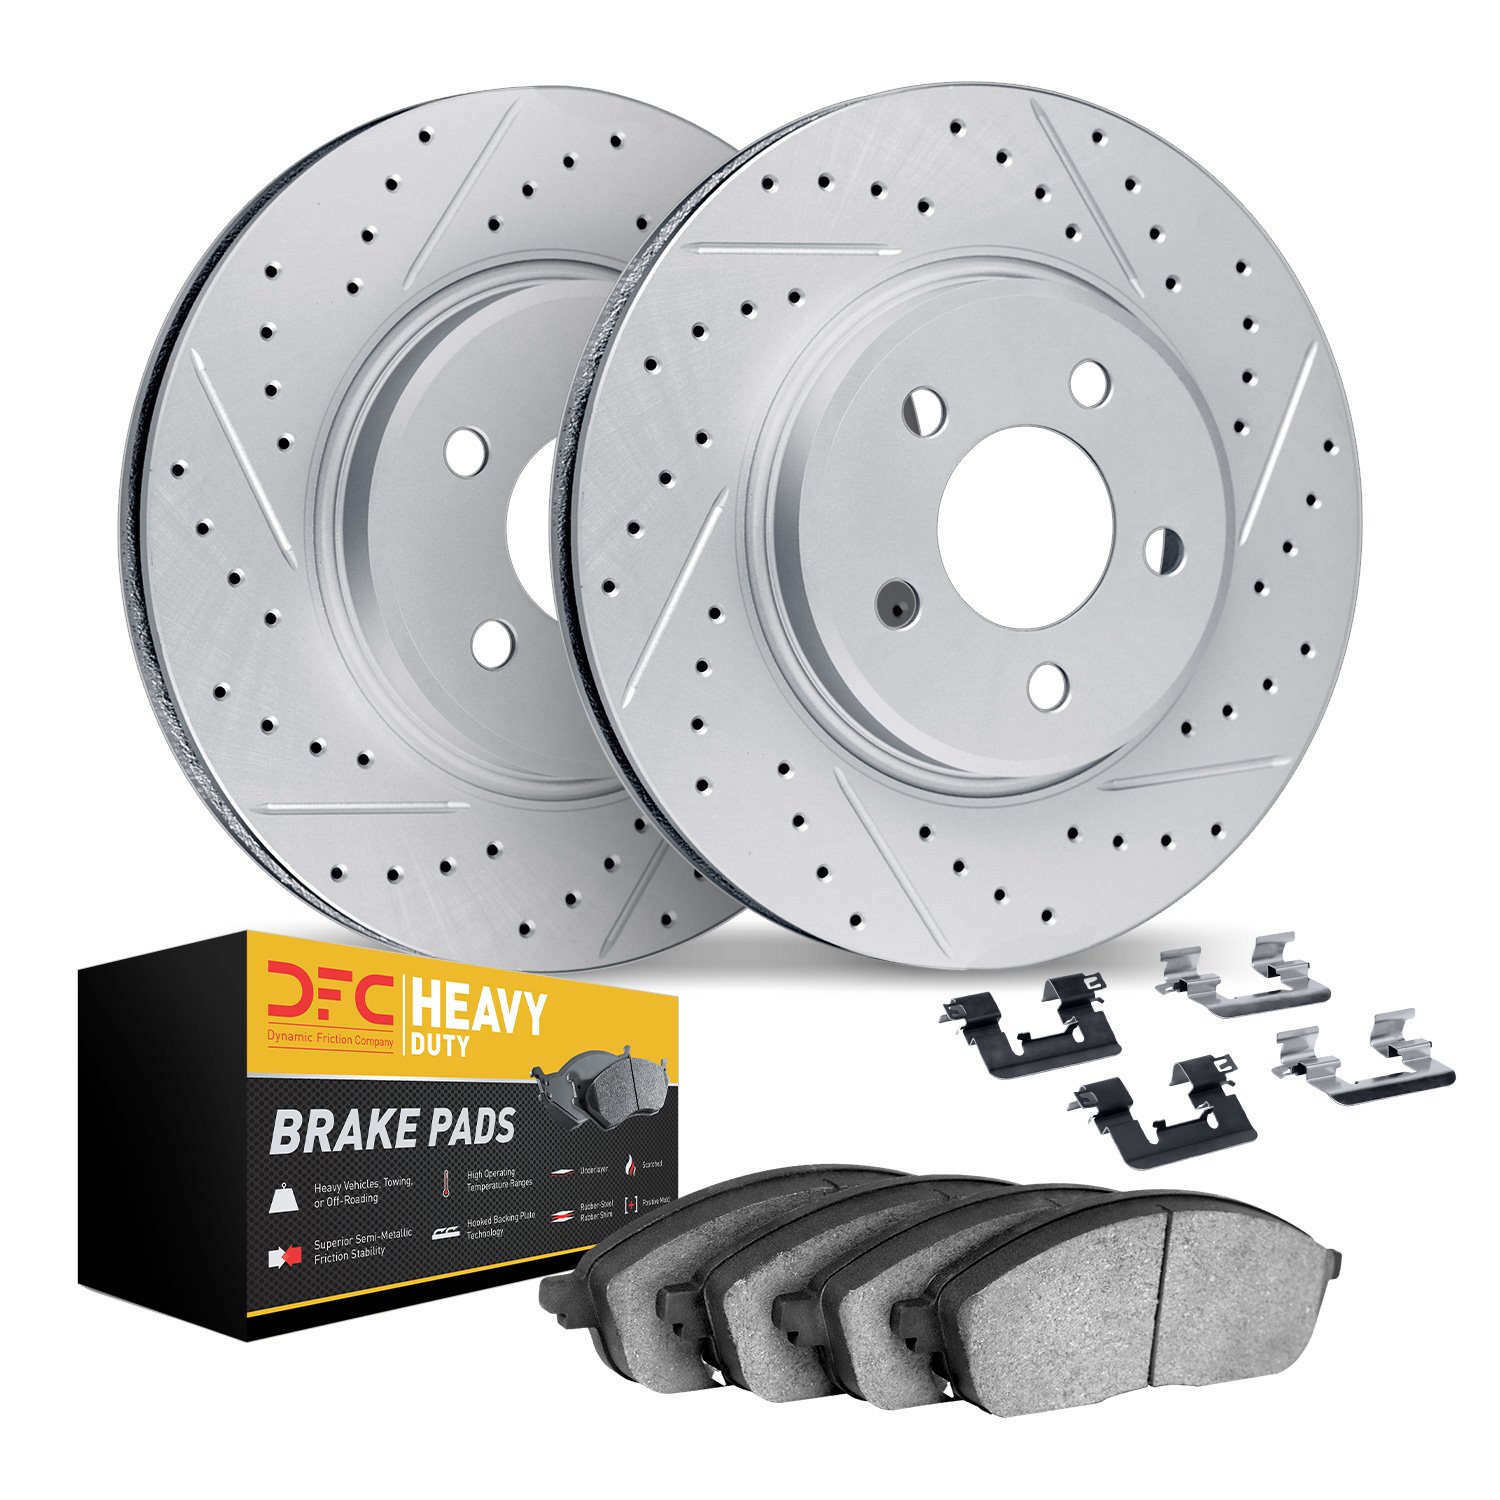 2212-48009 Geoperformance Drilled/Slotted Rotors w/Heavy-Duty Pads Kit & Hardware, 1979-1998 GM, Position: Front